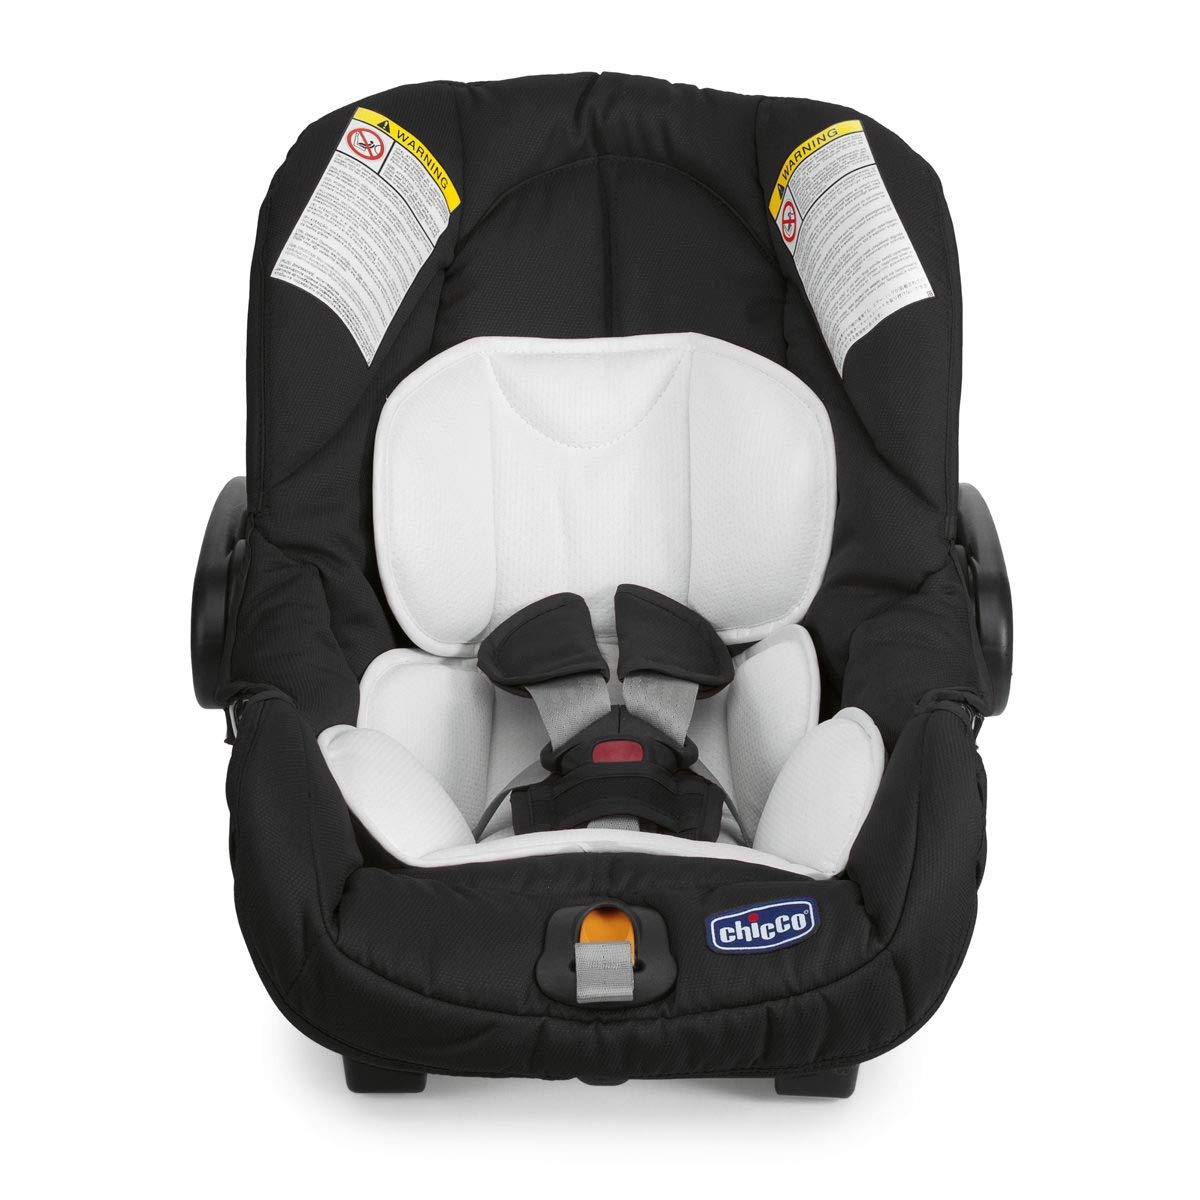 Chicco Key Fit Car Seat 0-13 kg Group 0+ for Babies from 0 to 15 Months, Child Seat with Mini Reducing Cushion, Can be Attached to Compatible Pushchairs, Black